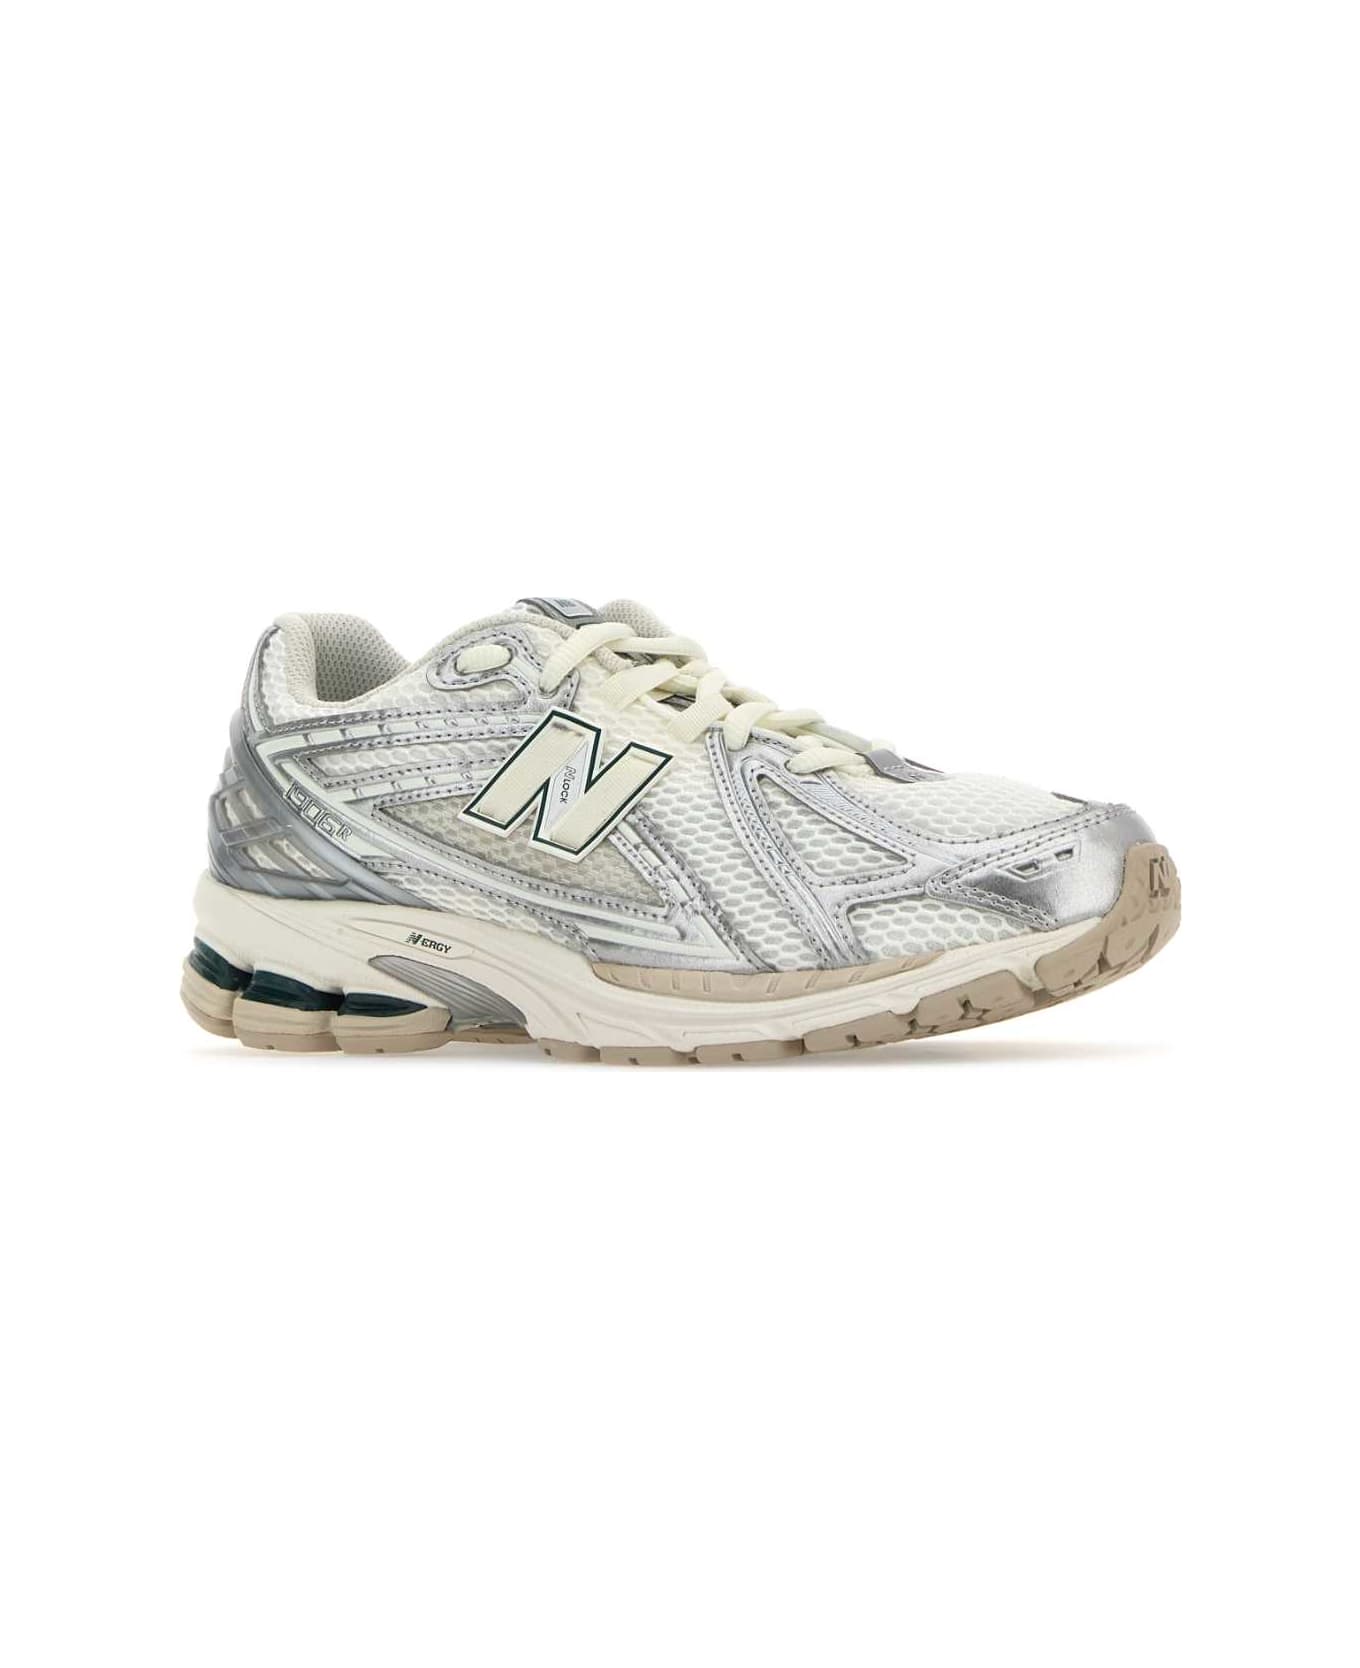 New Balance Multicolor Fabric And Mesh 1960r Sneakers - SILMETOFFWHI